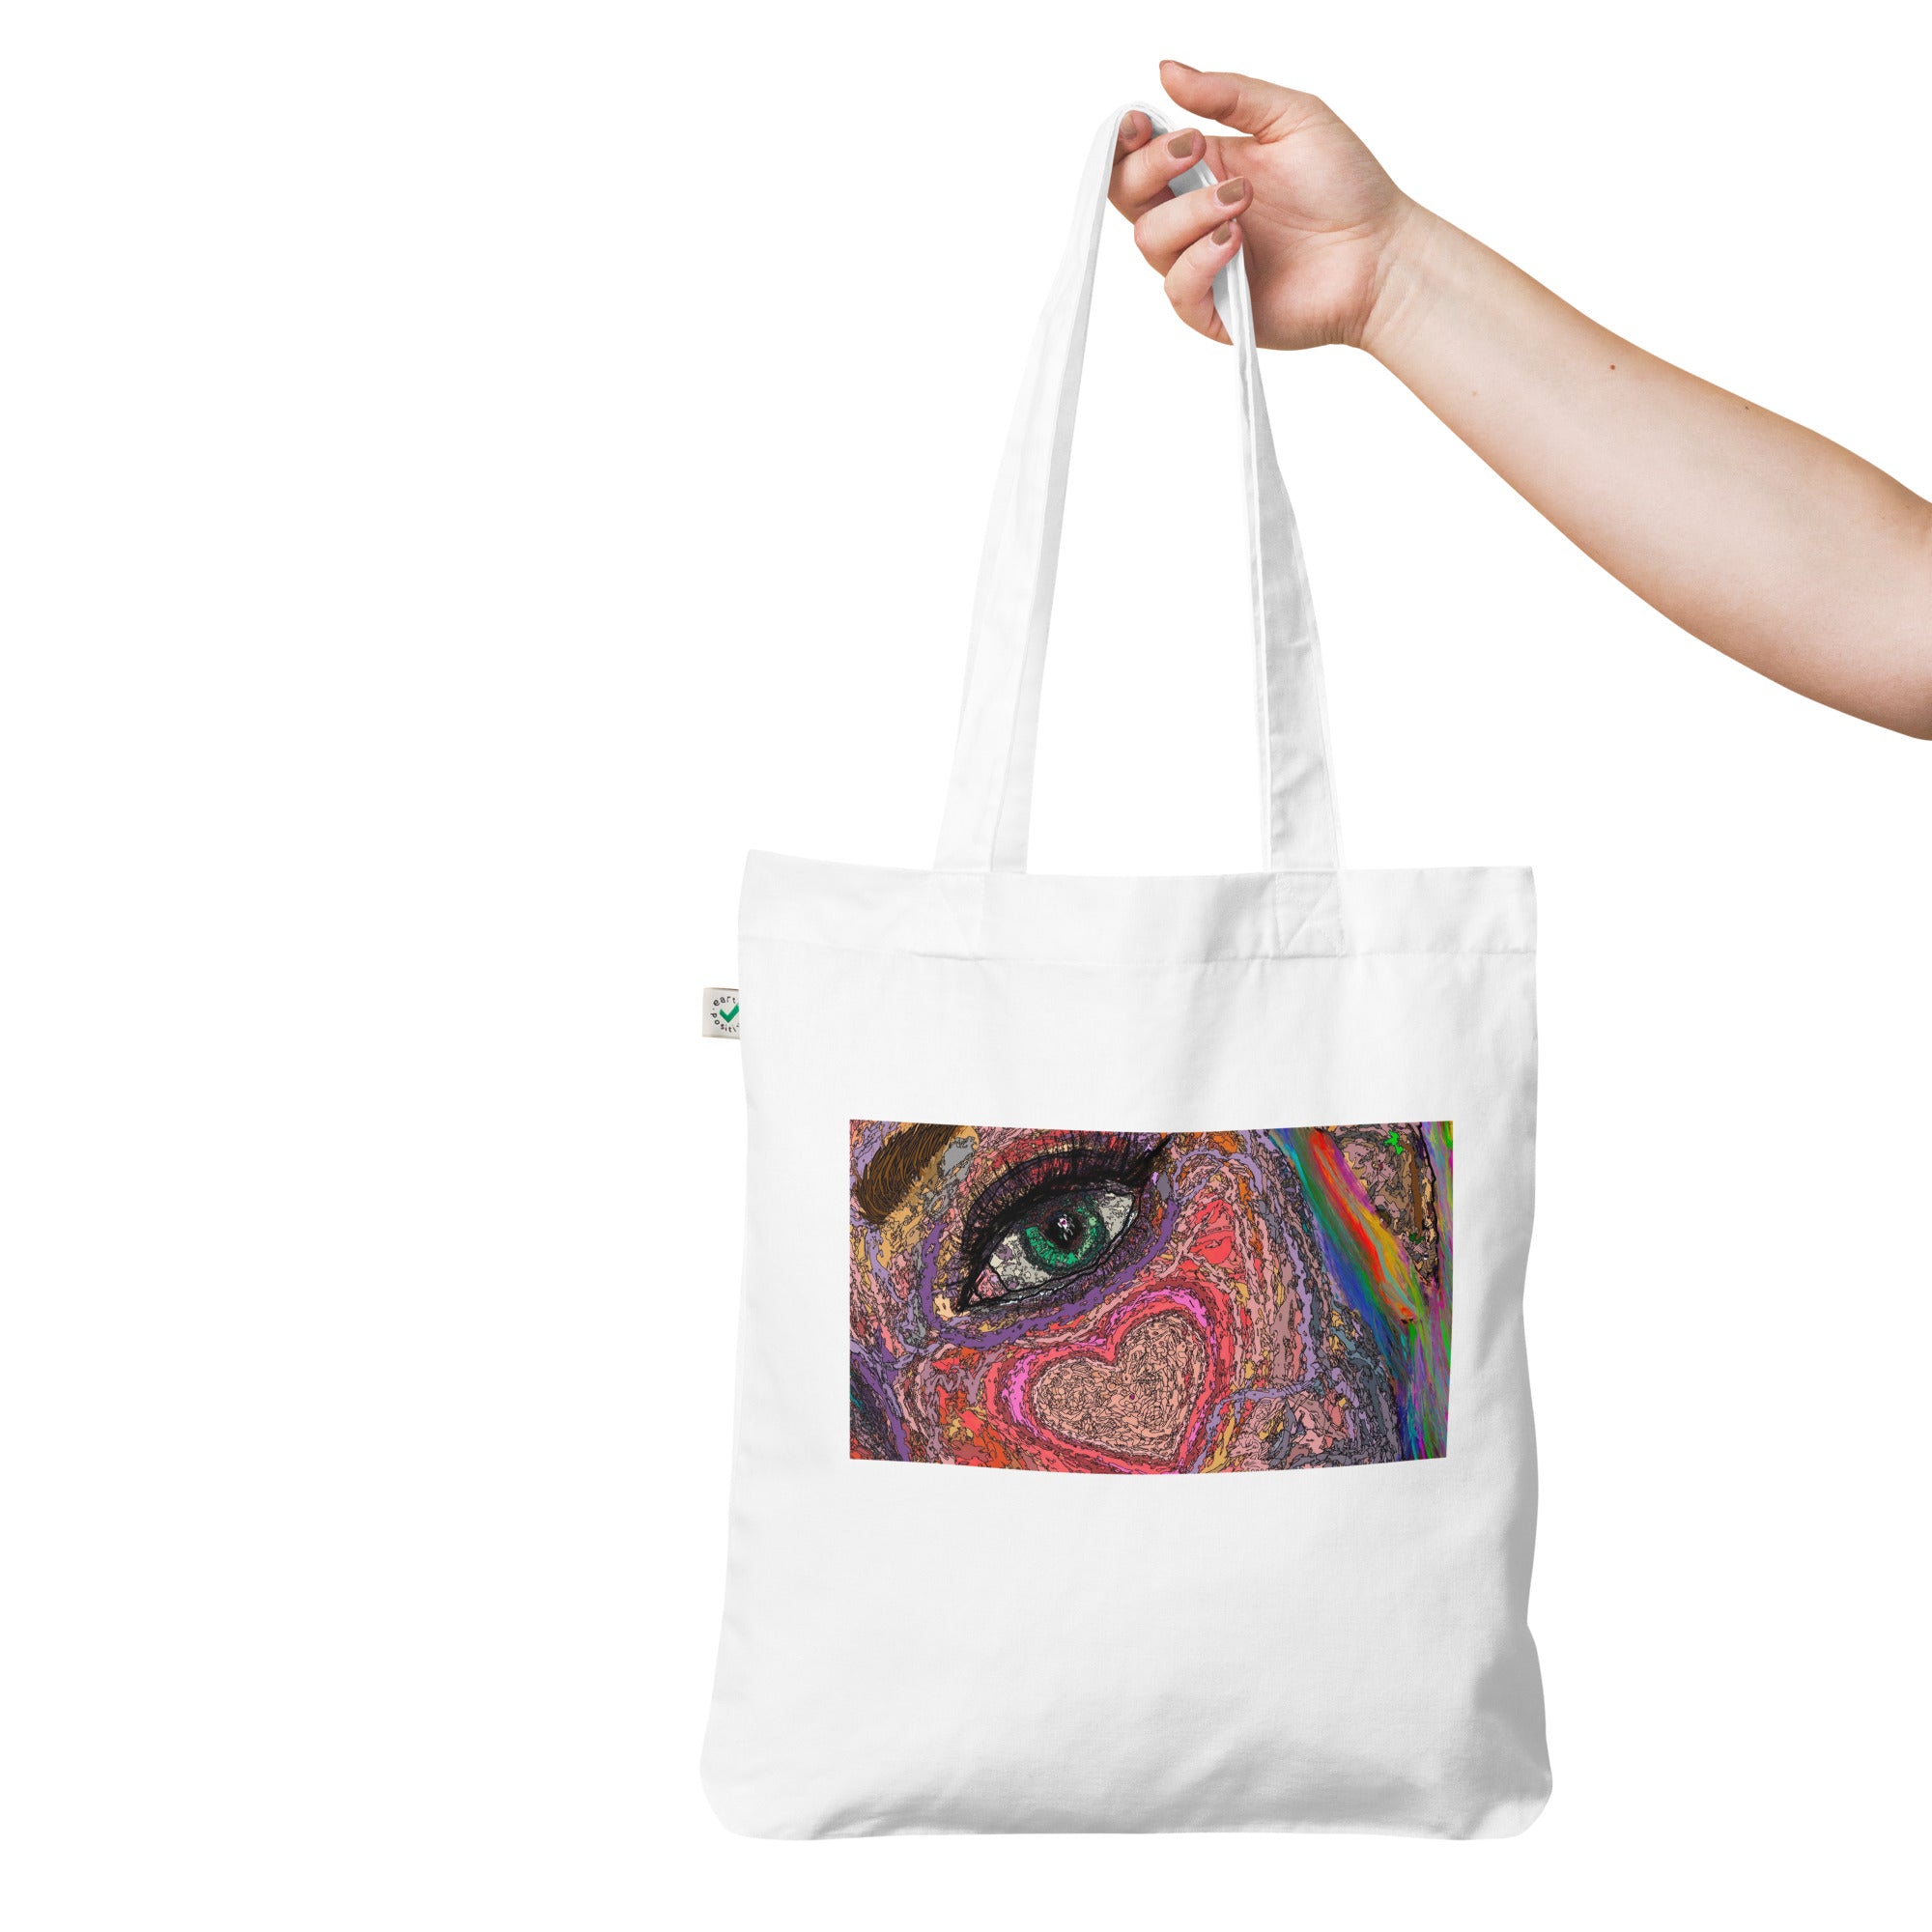 L'Appartement Graphic Tote Bag ナチュラルトートバッグ - トートバッグ